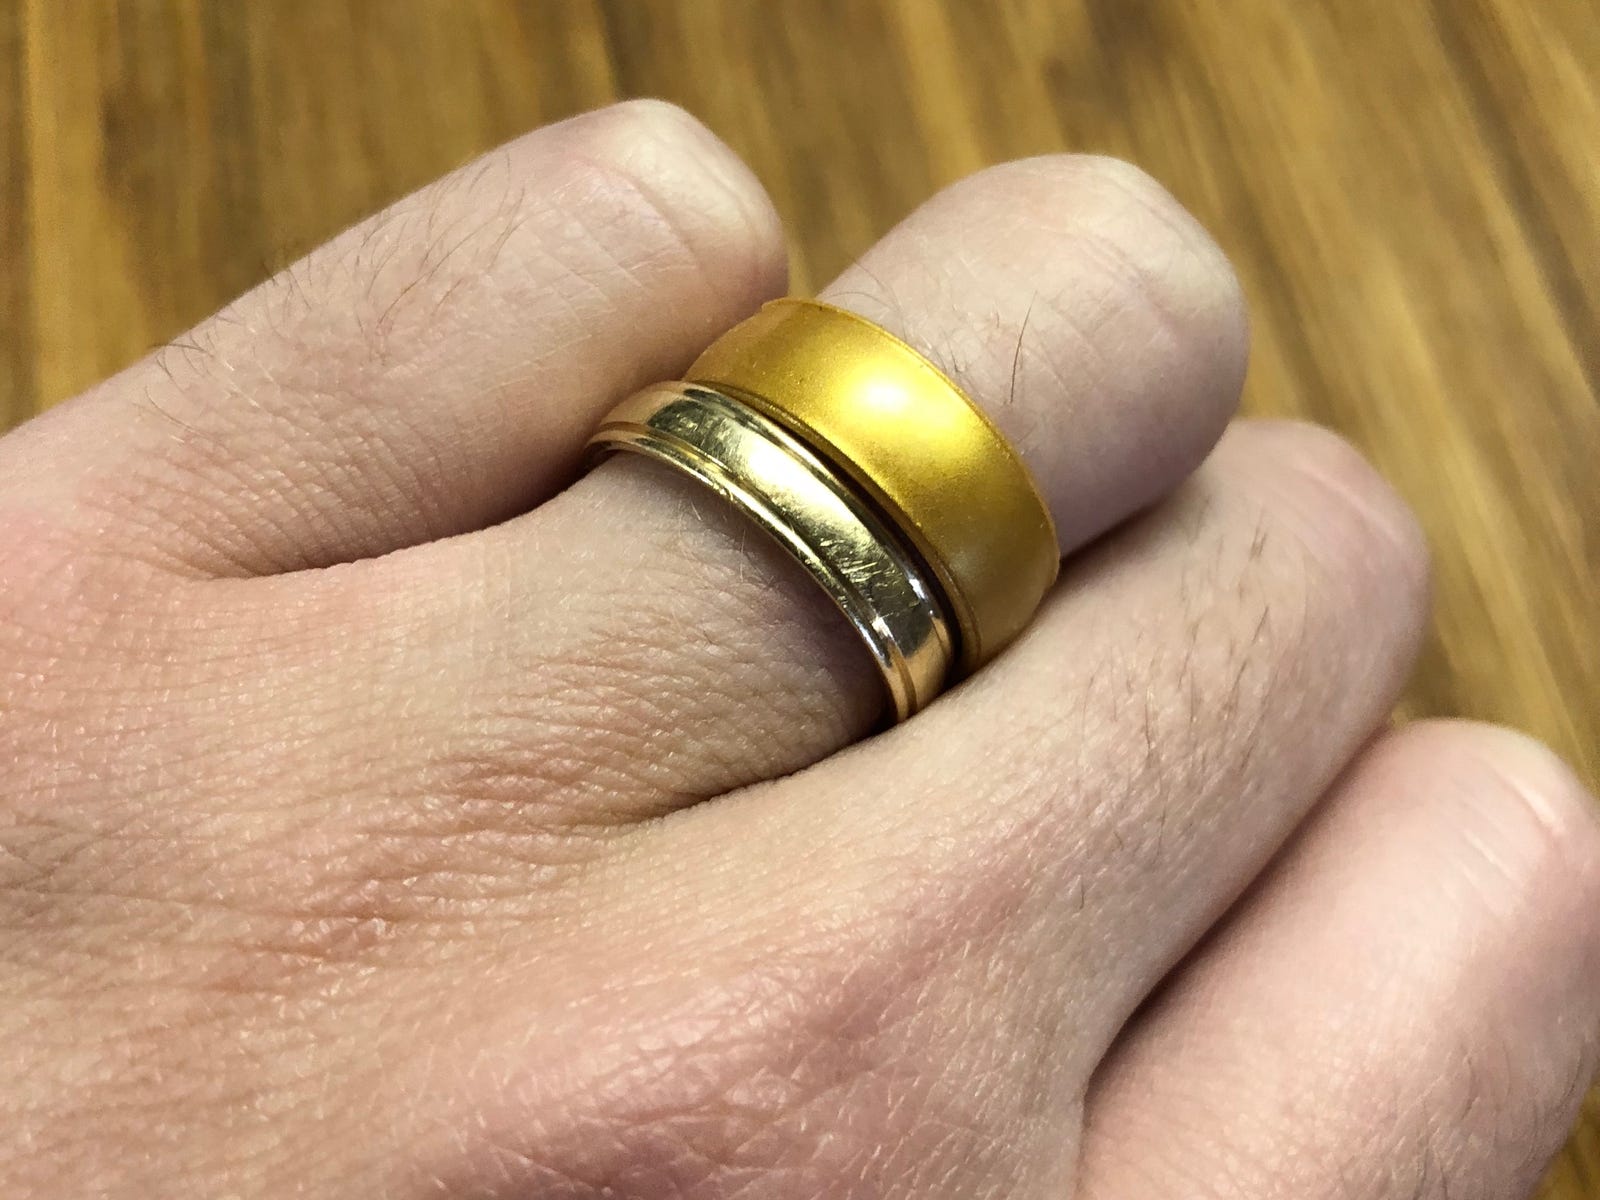 Enso Rings Review